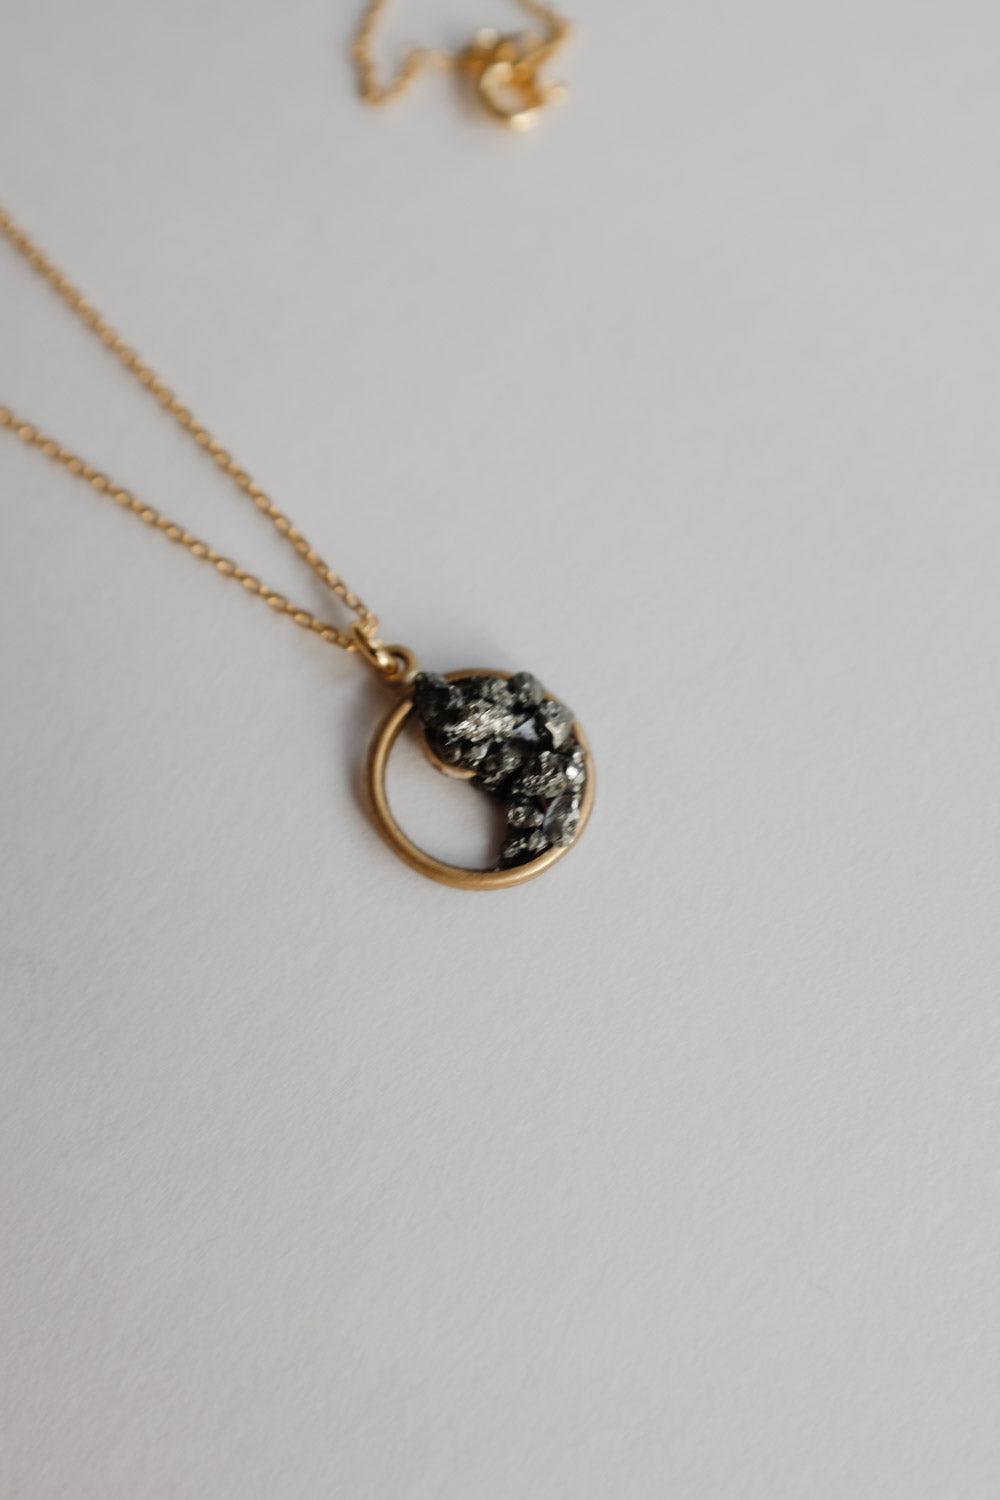 0001_YIN YANG PYRITE NECKLACE GOLD PLATED 925